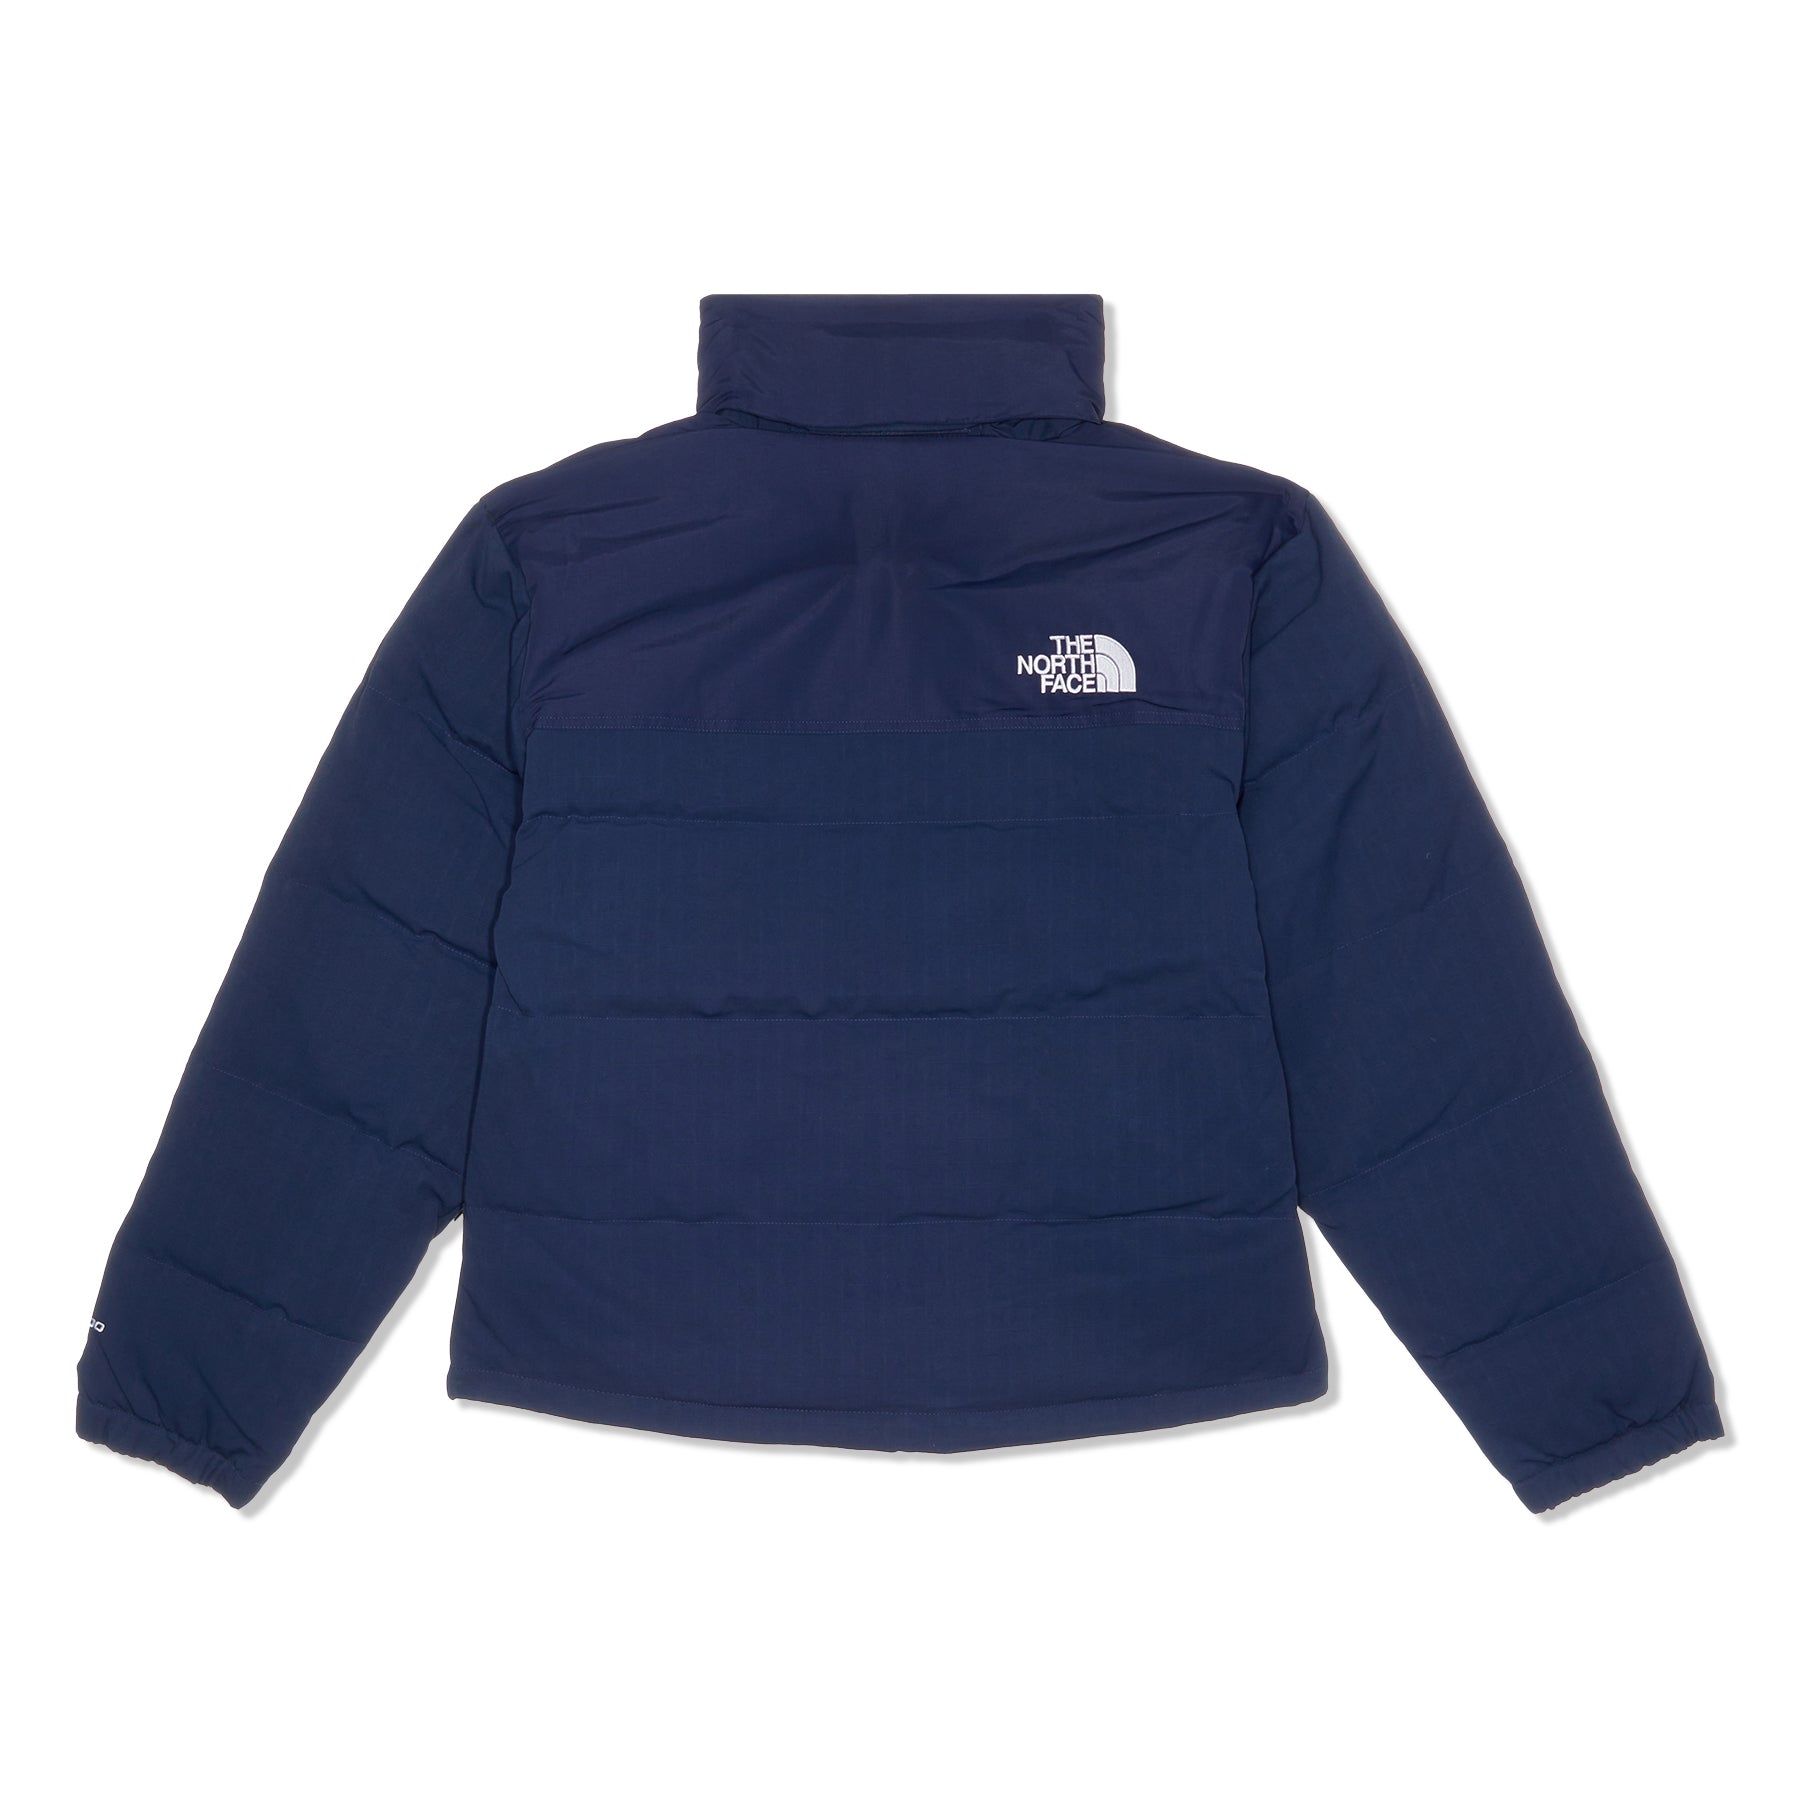 Concepts The North 92 Face – Navy) Nupste (Summit M Ripstop Jacket